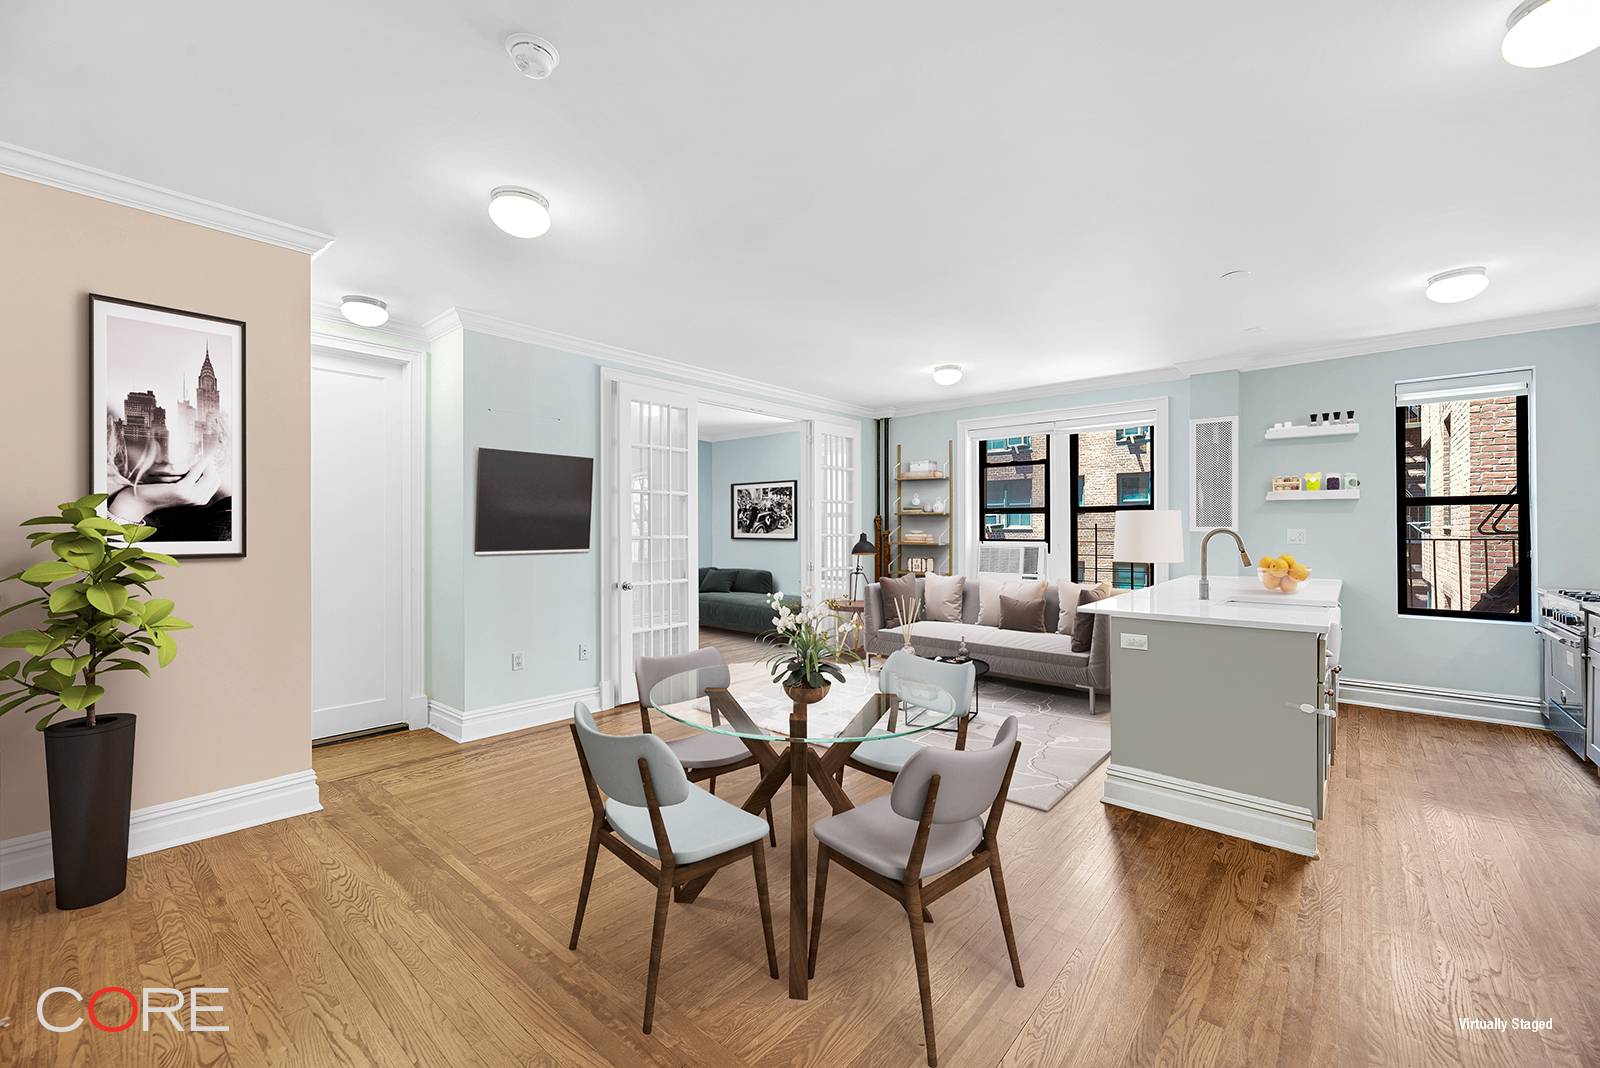 As you enter this beautifully renovated four bedroom home through the spacious foyer, you are immediately struck by the warmth of the pre war details, the gallery length walls, and ...